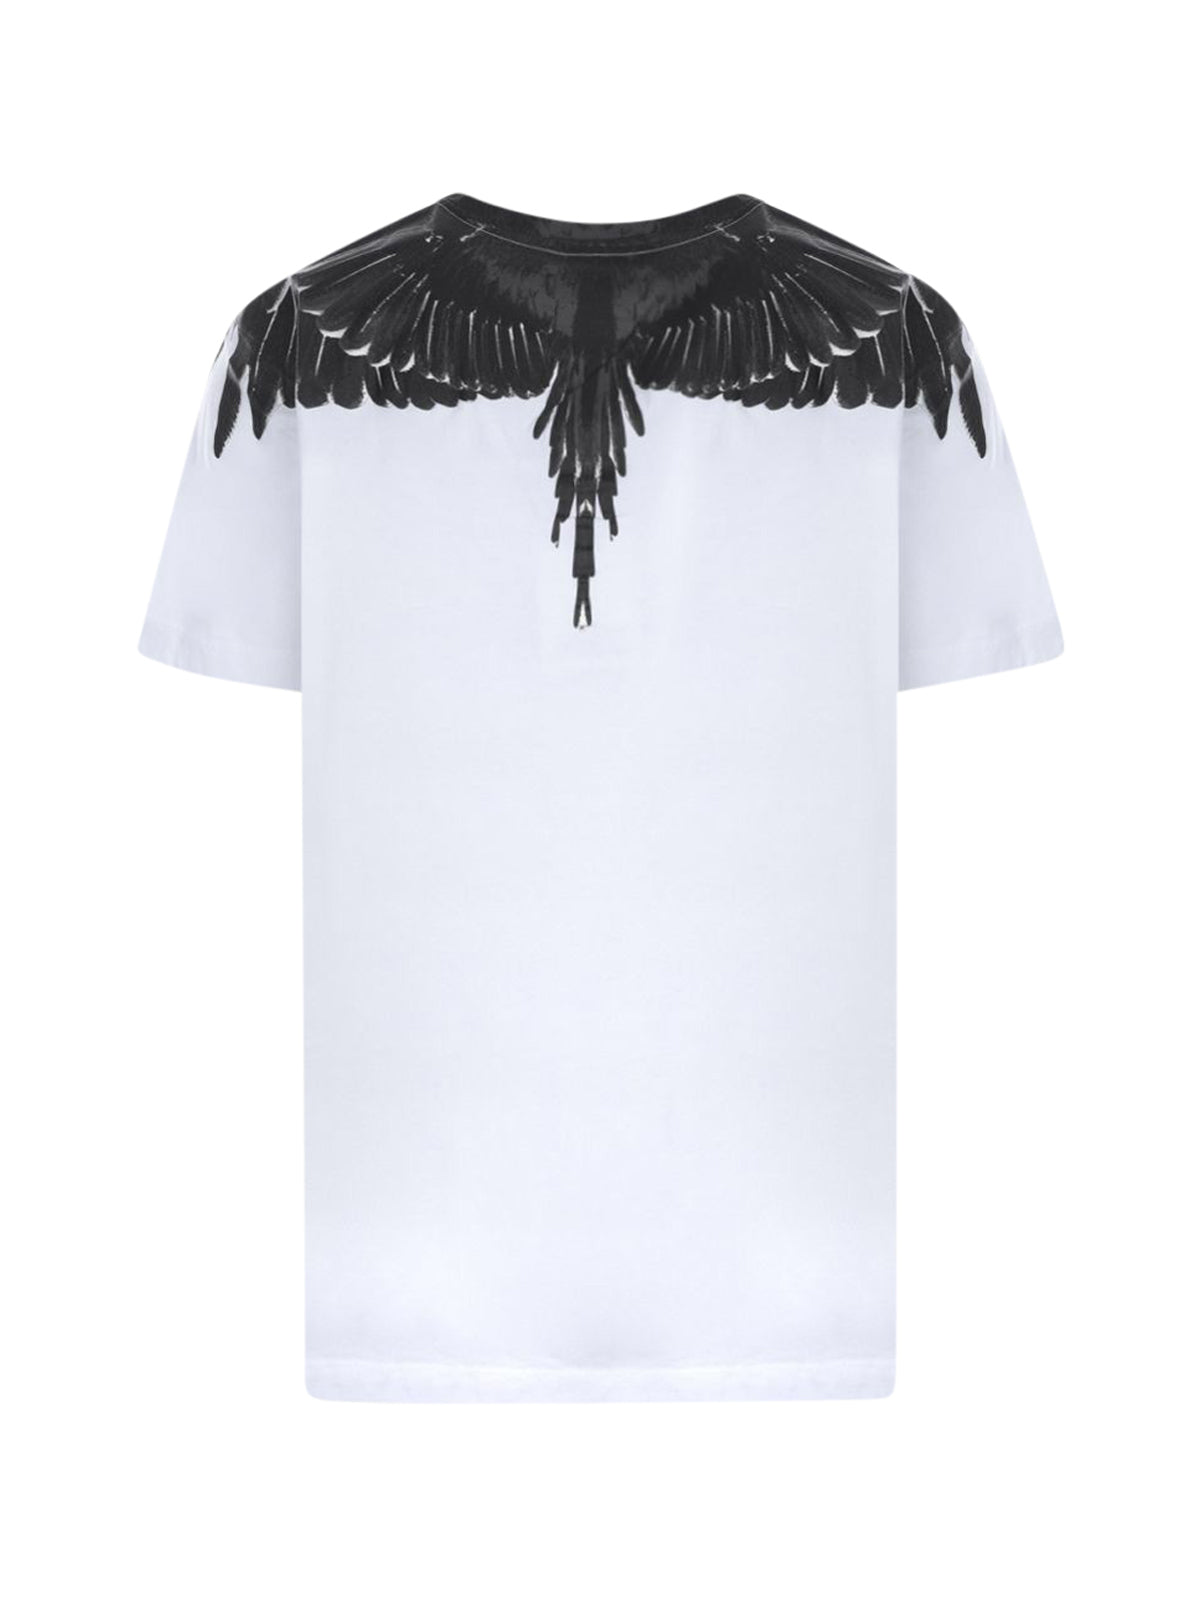 ICON WINGS COTTON T-SHIRT